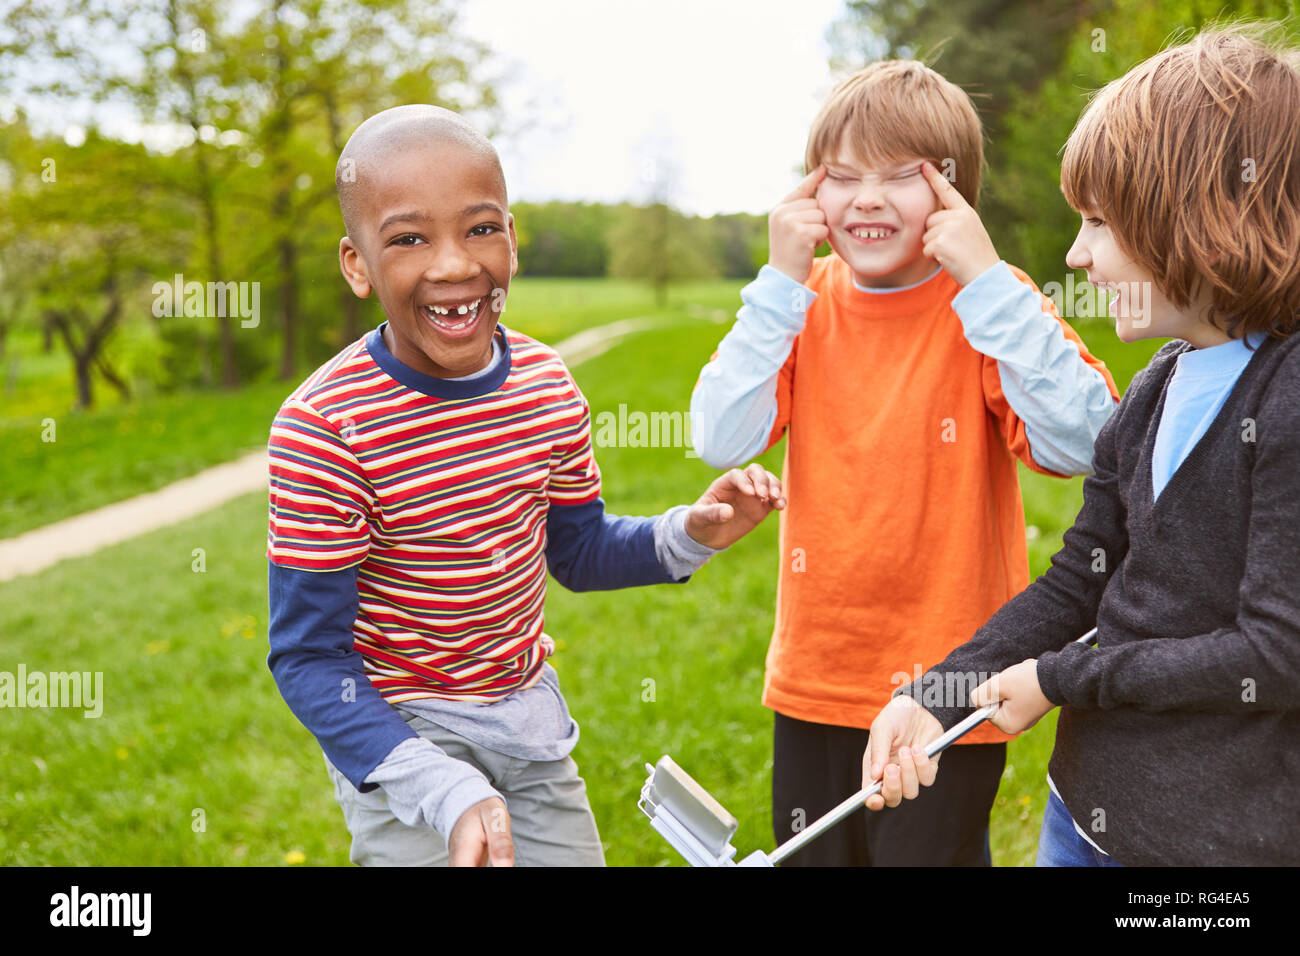 Three laughing kids as friends have fun together and make faces Stock Photo